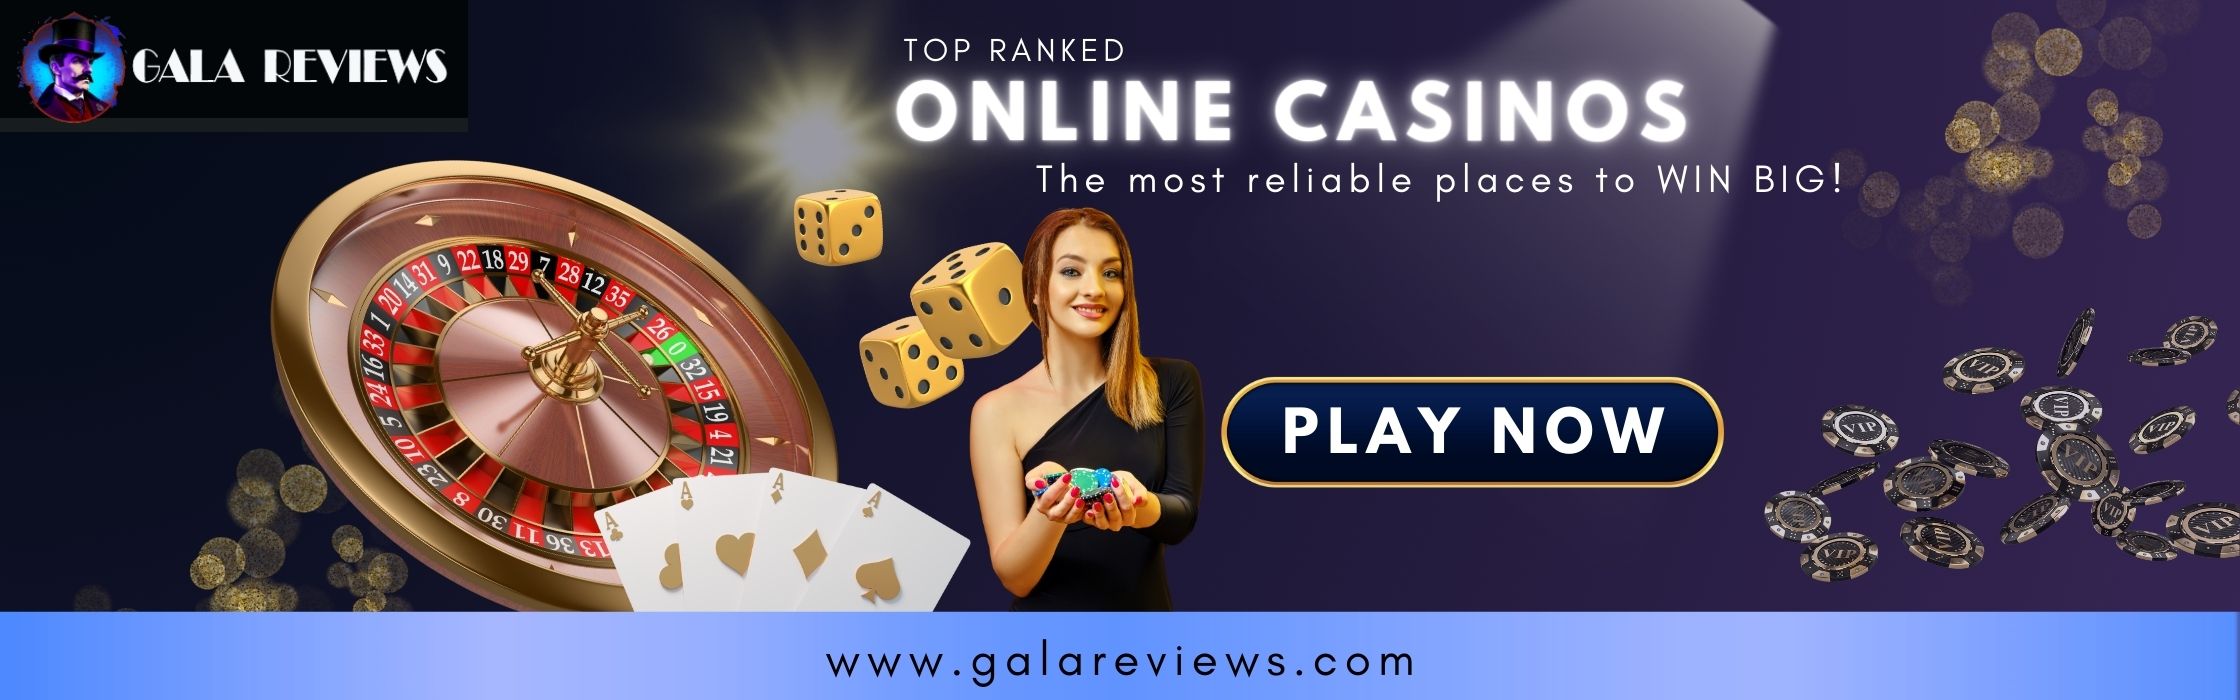 gala reviews banner ad mobile